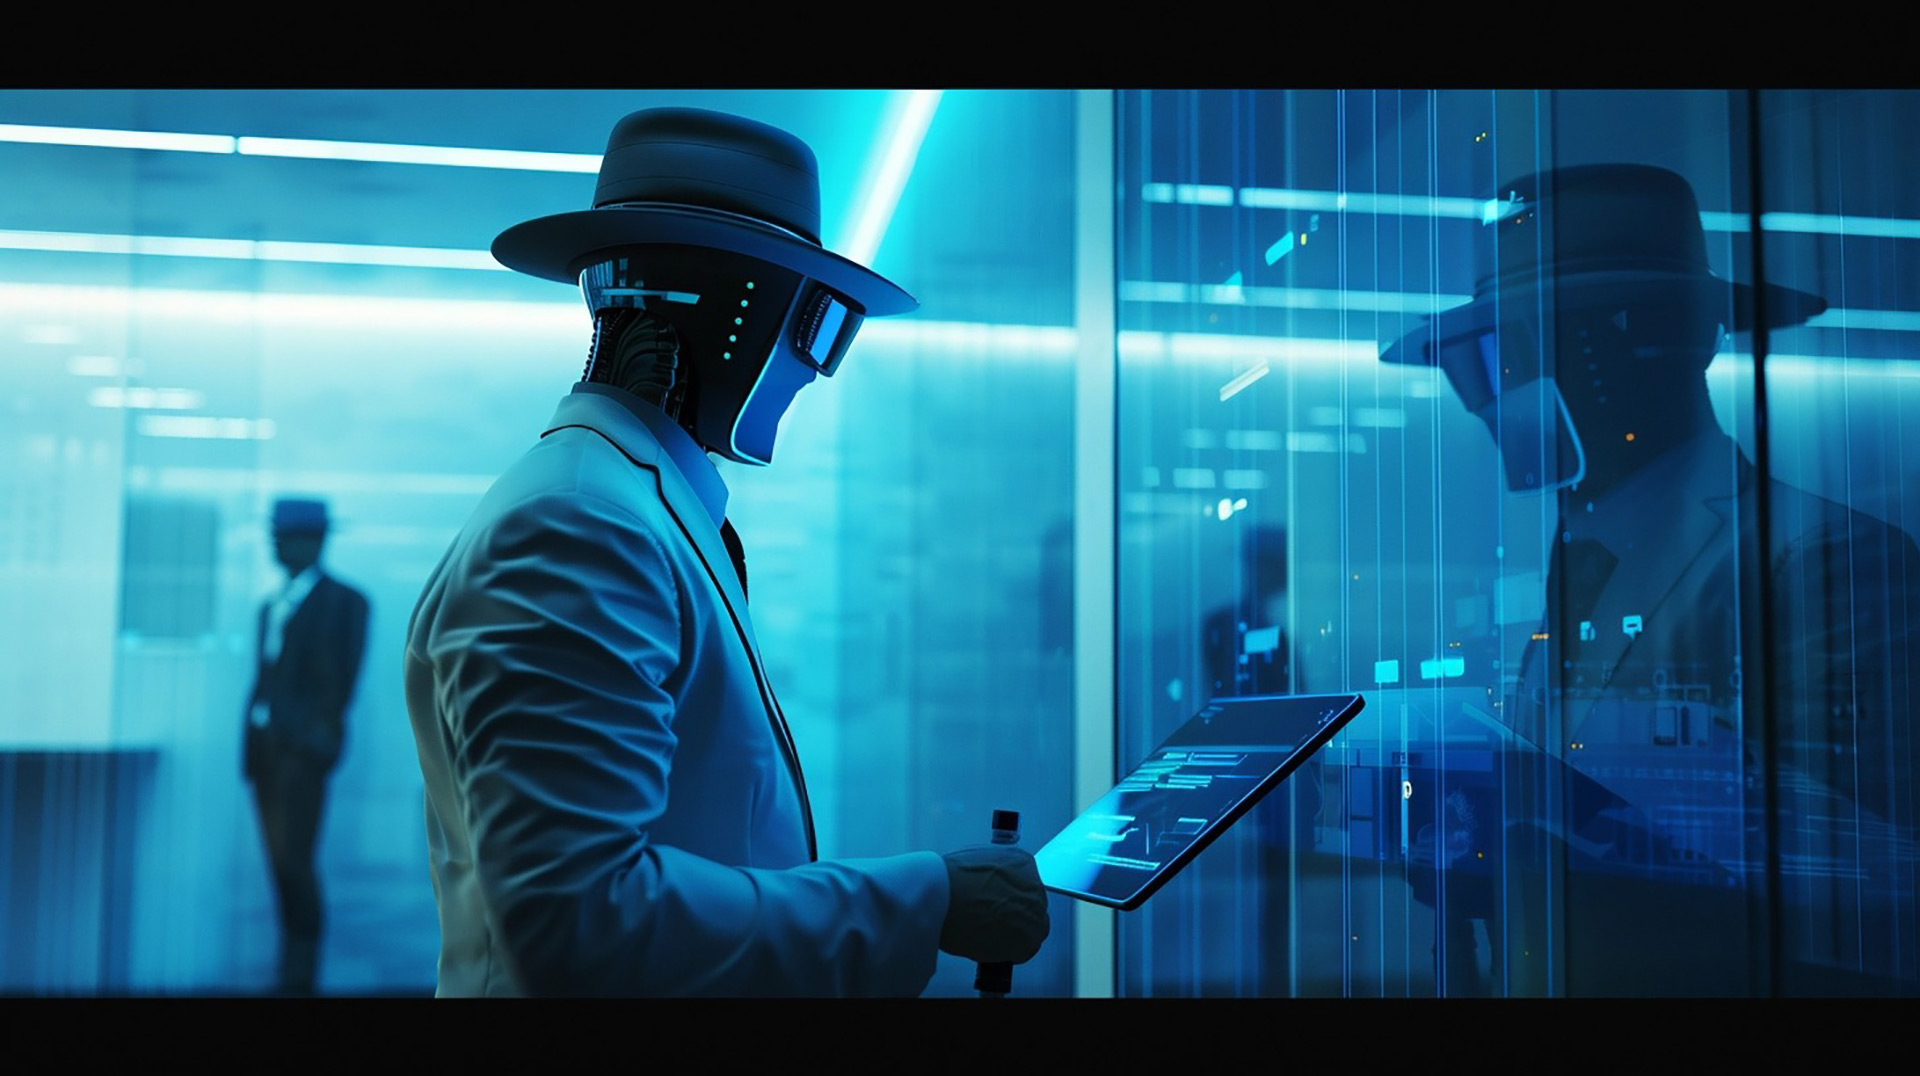 Neon Crime Syndicate: Ultra HD Wallpapers of Futuristic Gangsters